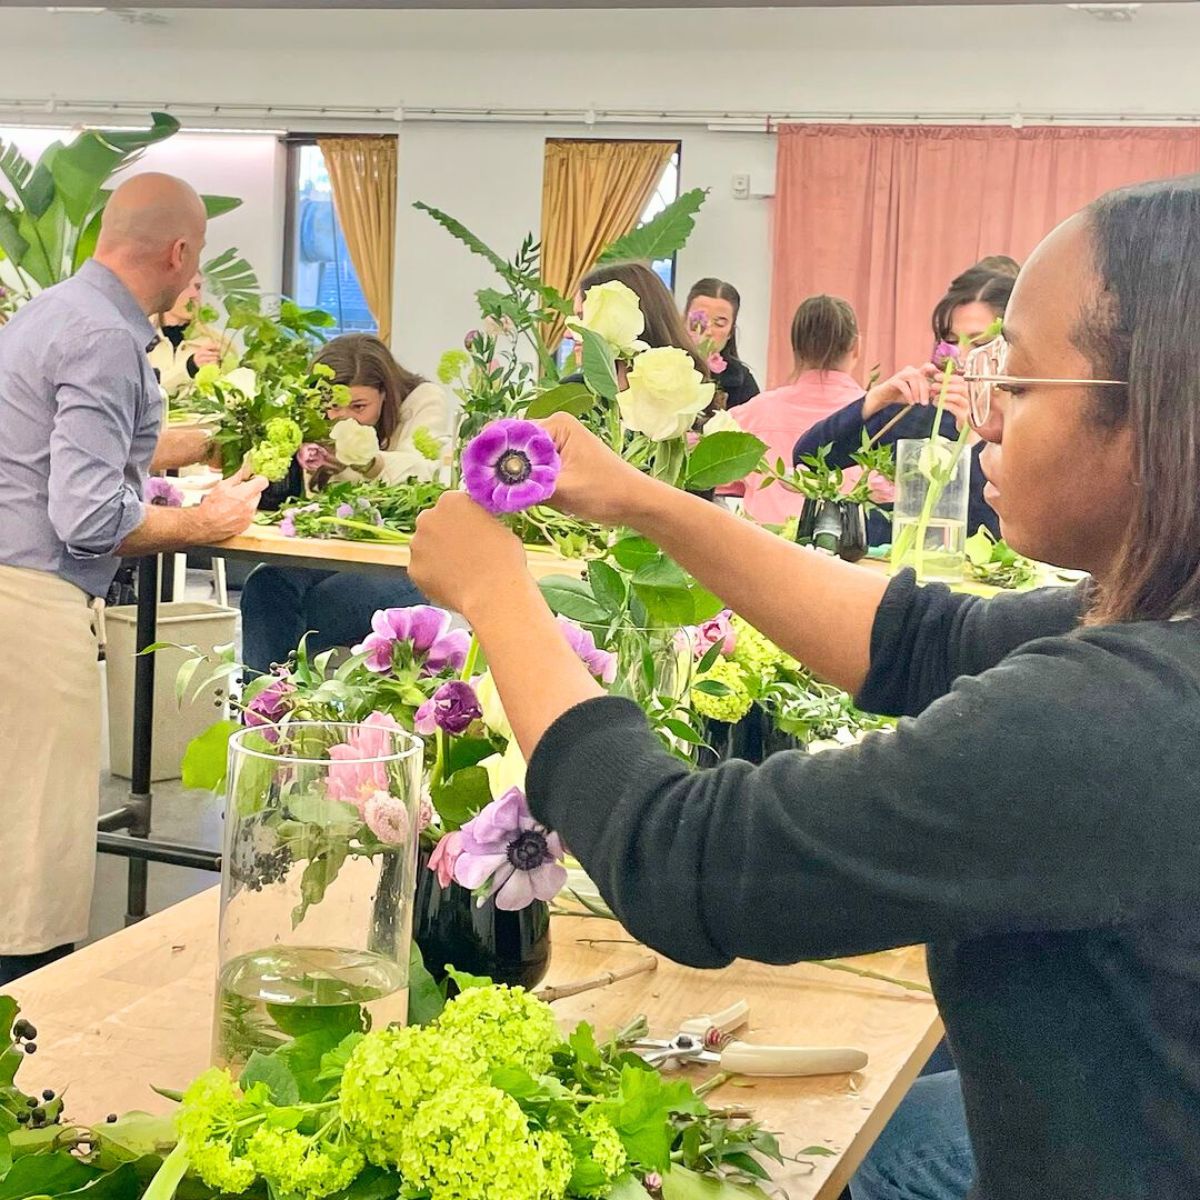 Introductory courses at FlowerSchool